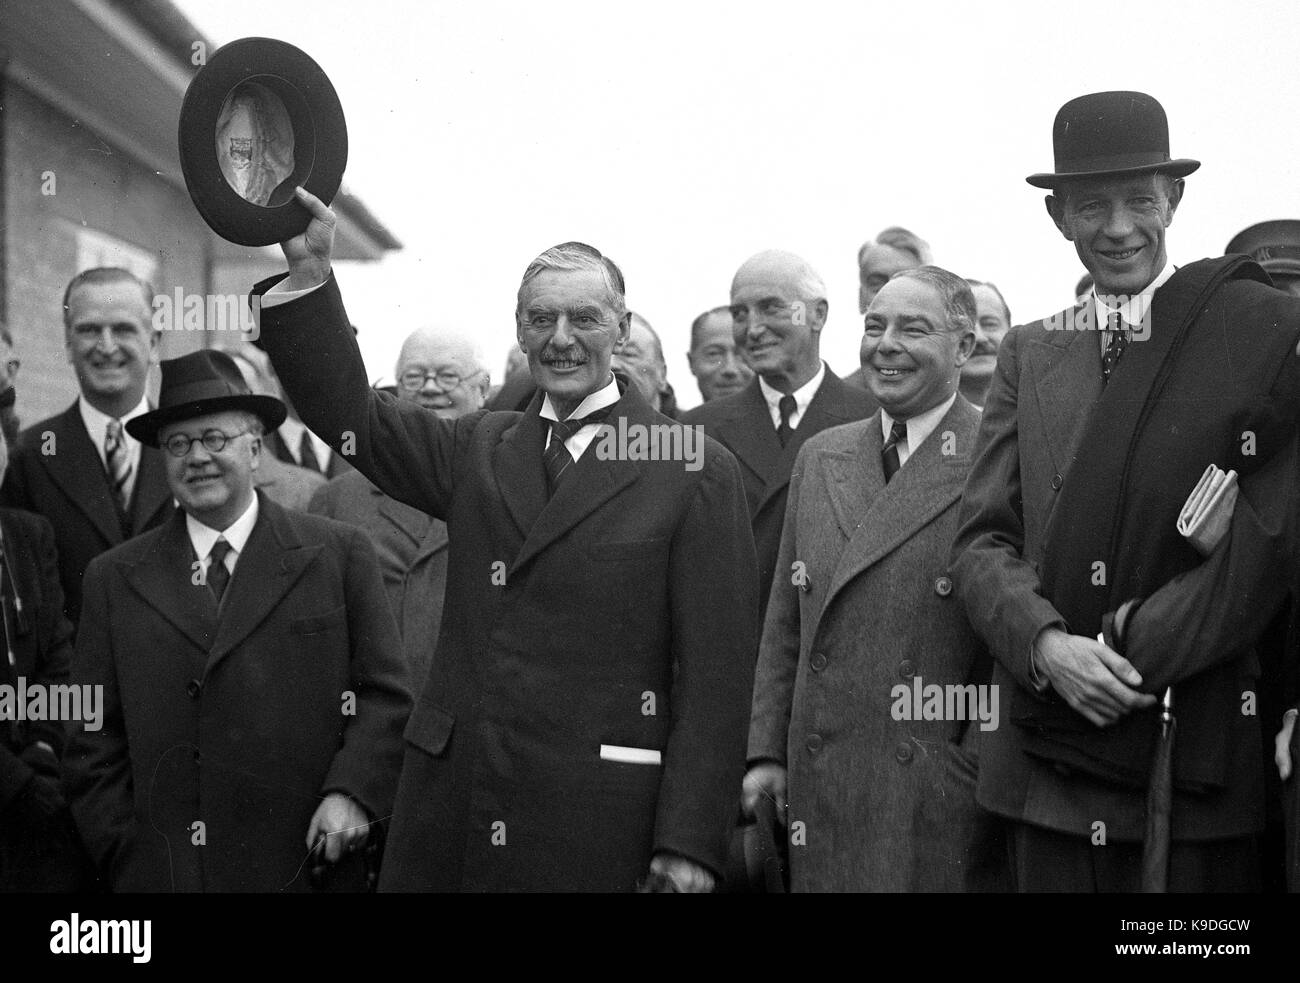 British prime minister Neville Chamberlain leaving for his summit meeting with the German Chancellor Adolf Hitler in Munich. Prime Minster Chamberlain returned with the paper signed by Hitler and himself sticking out of his pocket after declaring to the waiting crowd ' Peace in our time ' 3rd October 1938. With him are Sir Kingsley Wood, Leslie Hore-Belisha, Lord Halifax. Stock Photo